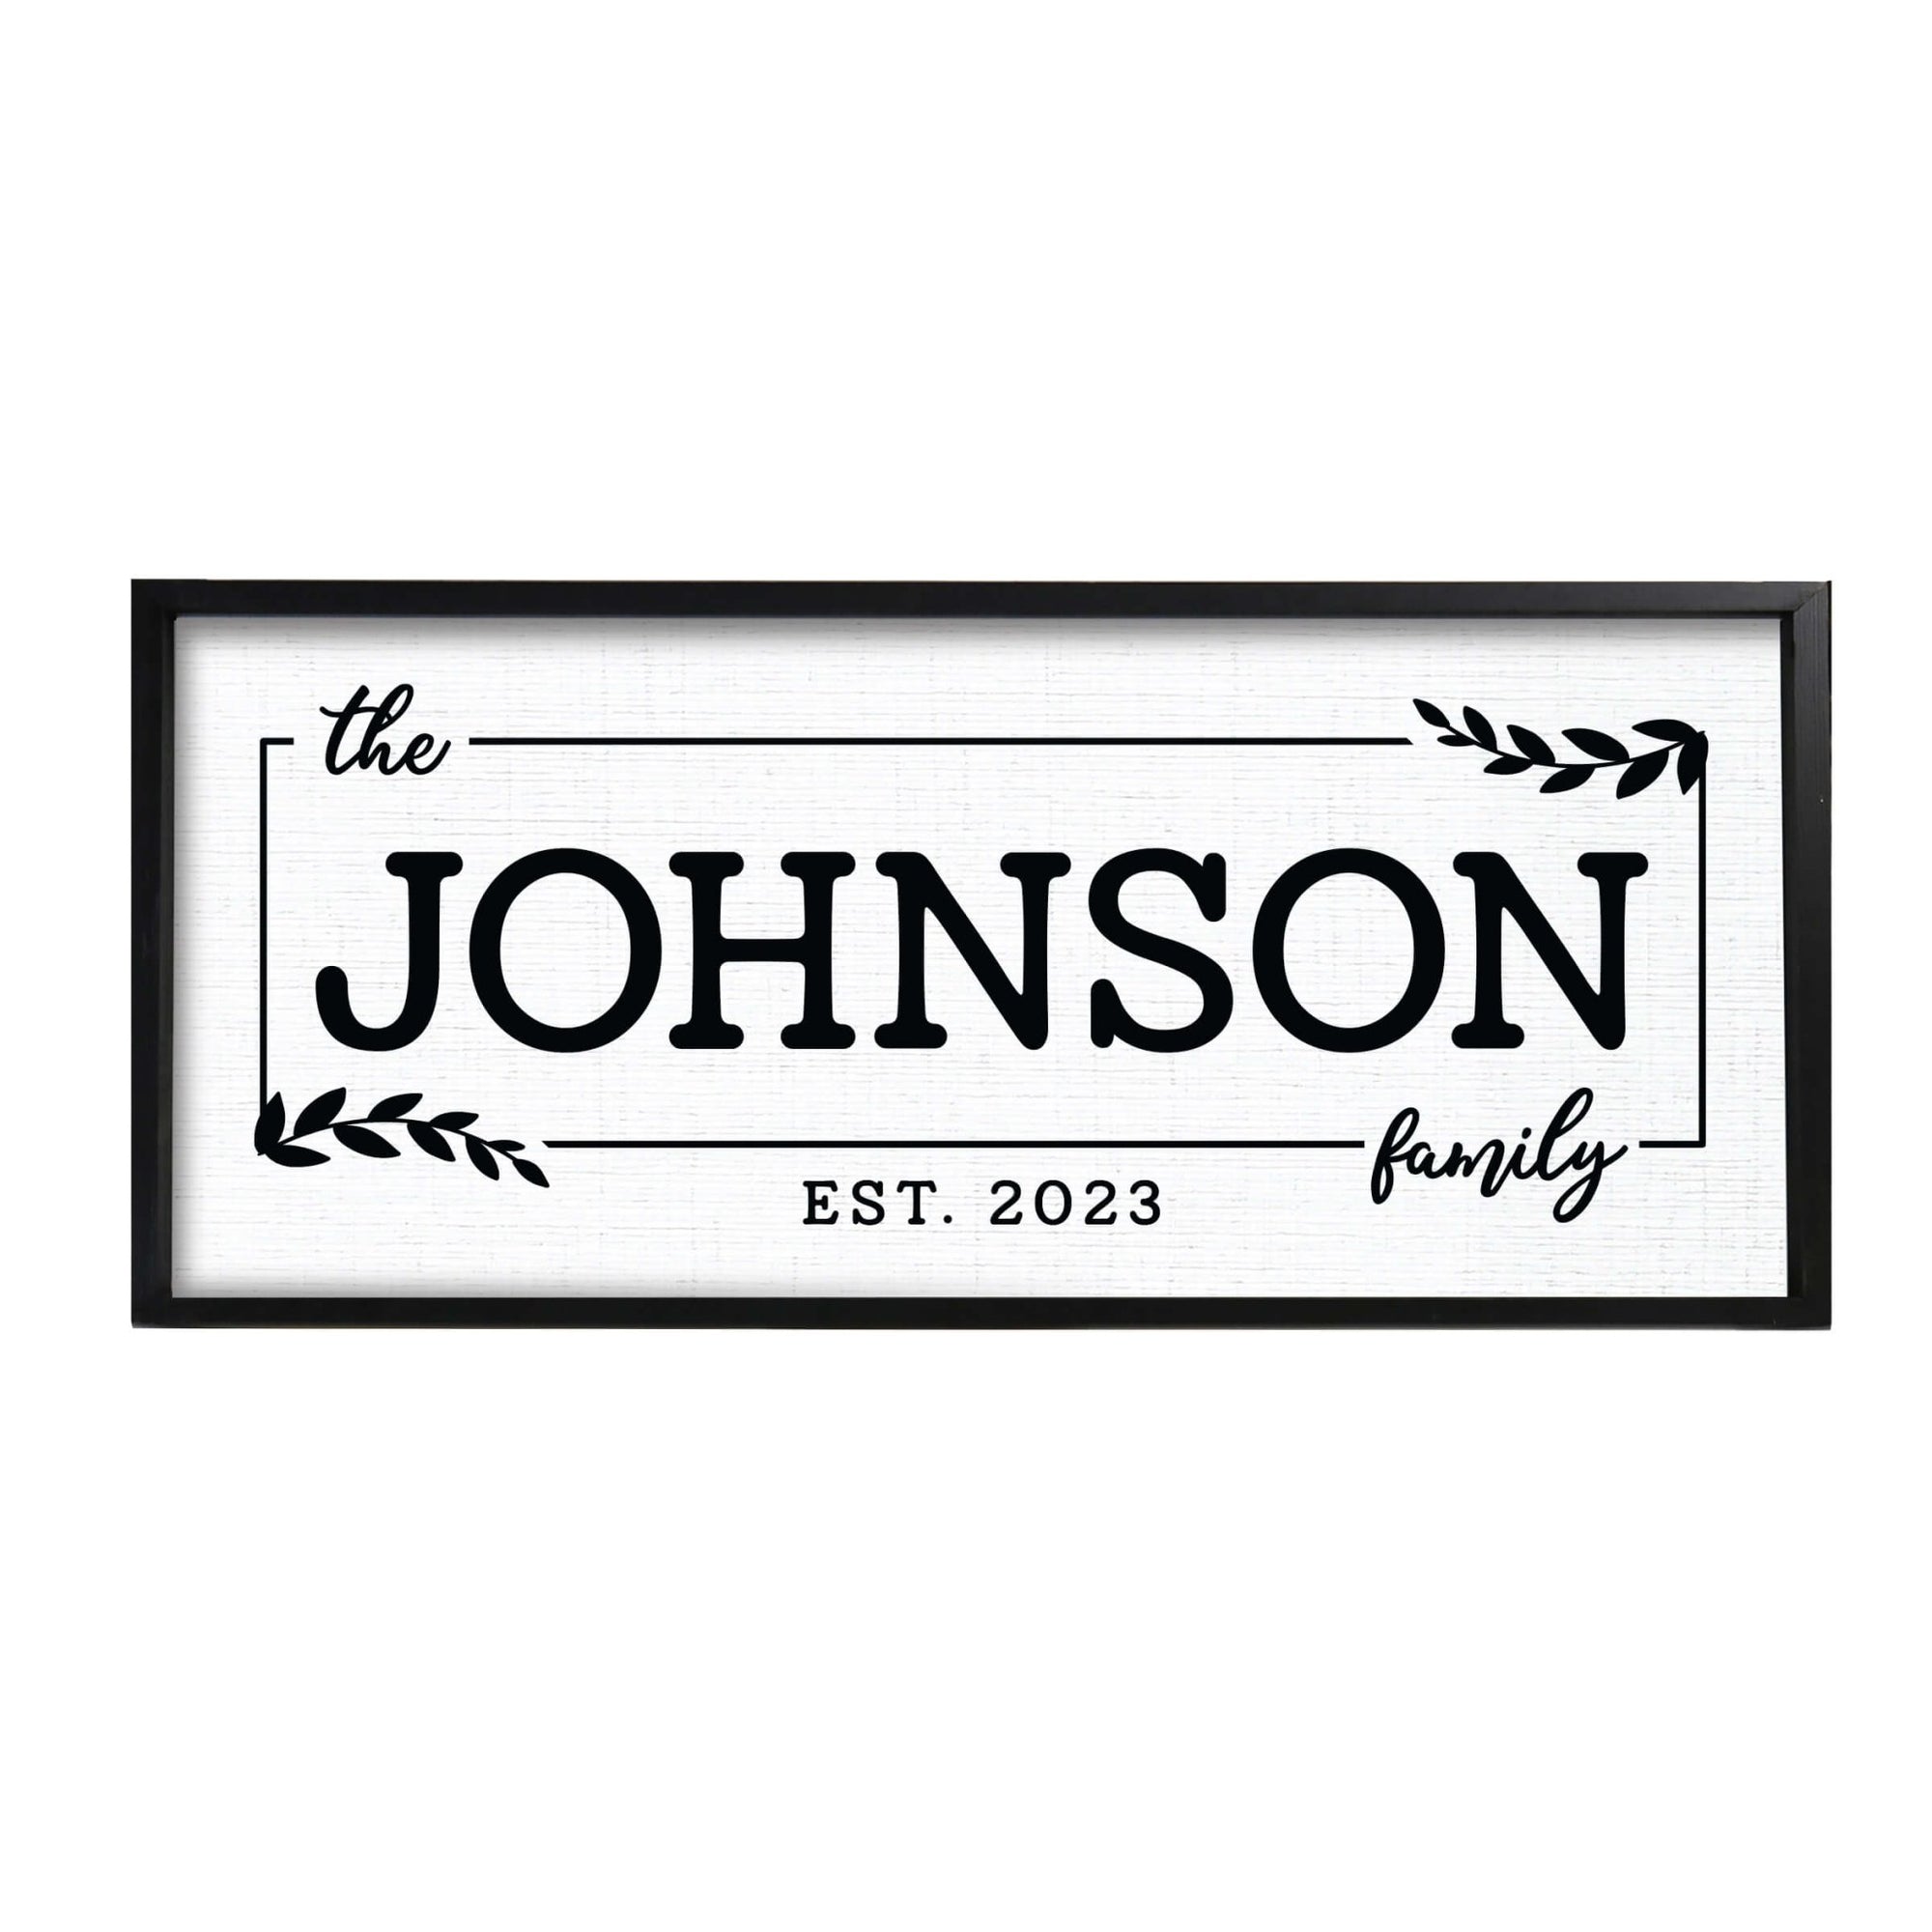 Personalized Family Sign Framed Shadow Box For Home Décor Ideas - The Johnson Family - LifeSong Milestones